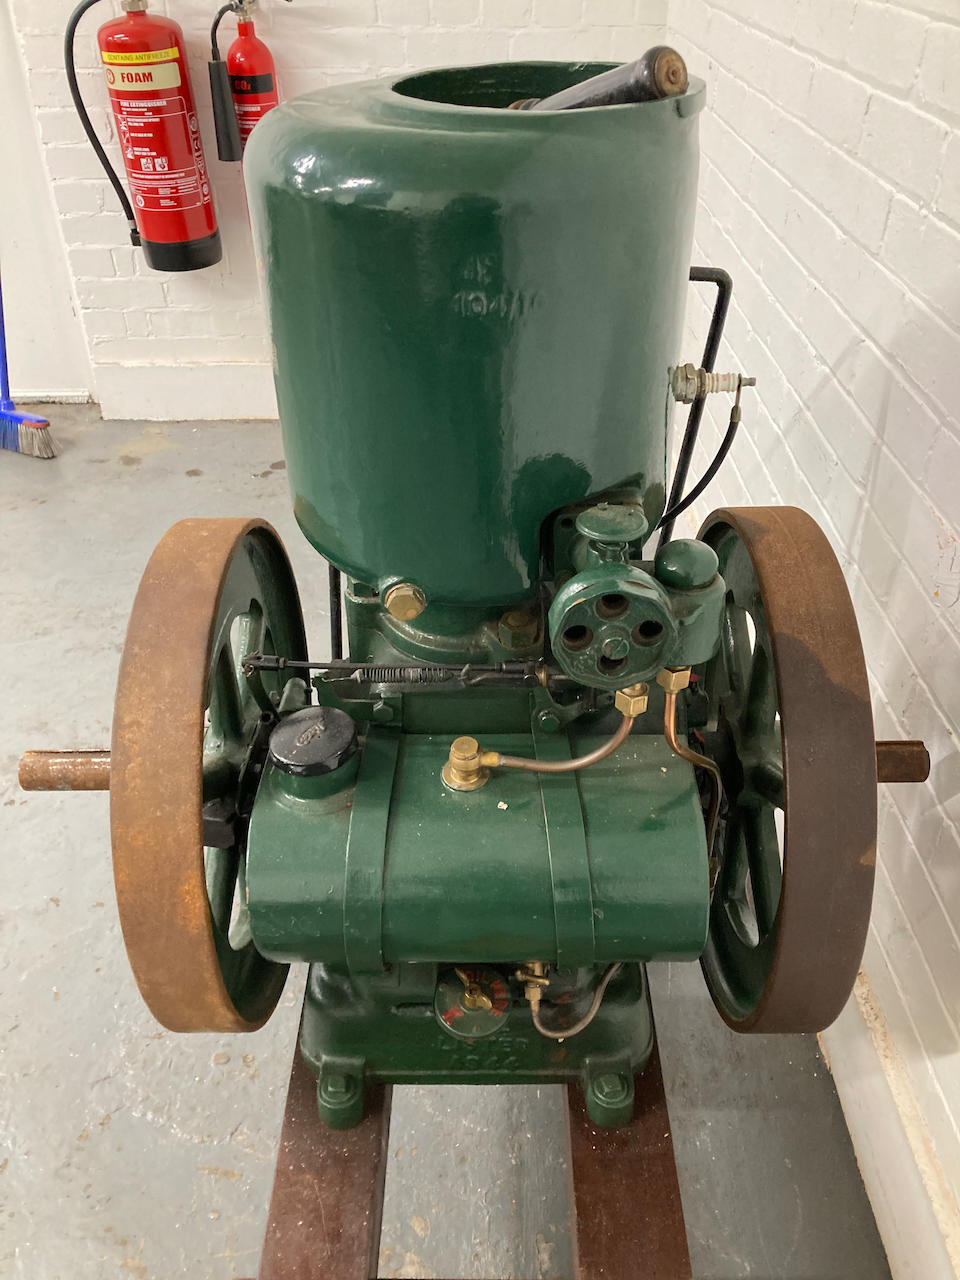 A Lister Junior 3&#189;HP stationary engine by R.A.Lister and Co. Ltd